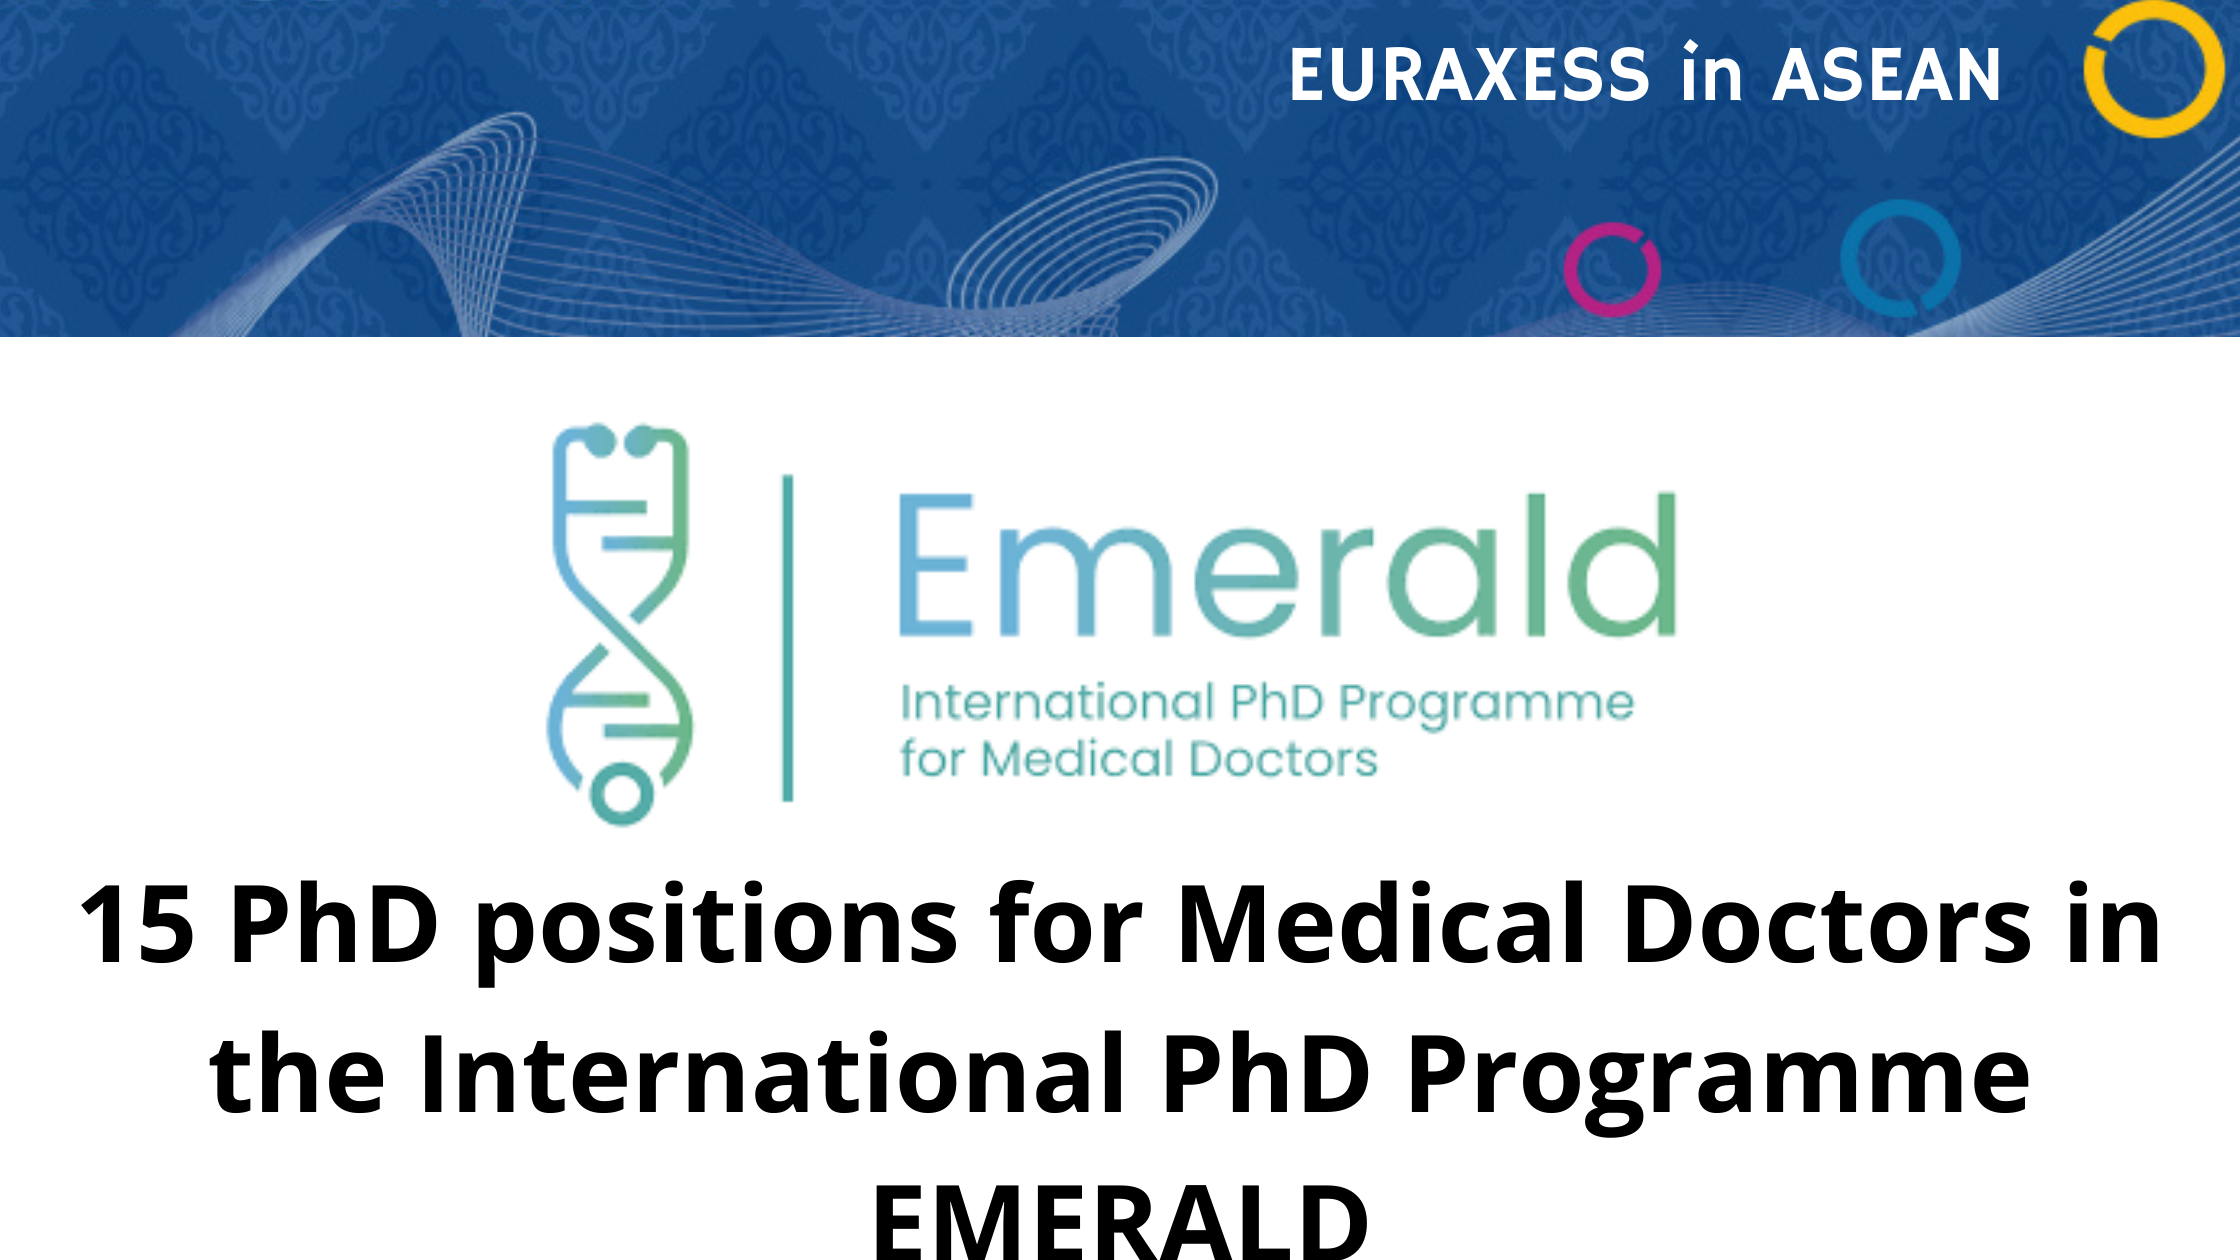 phd for doctors in europe